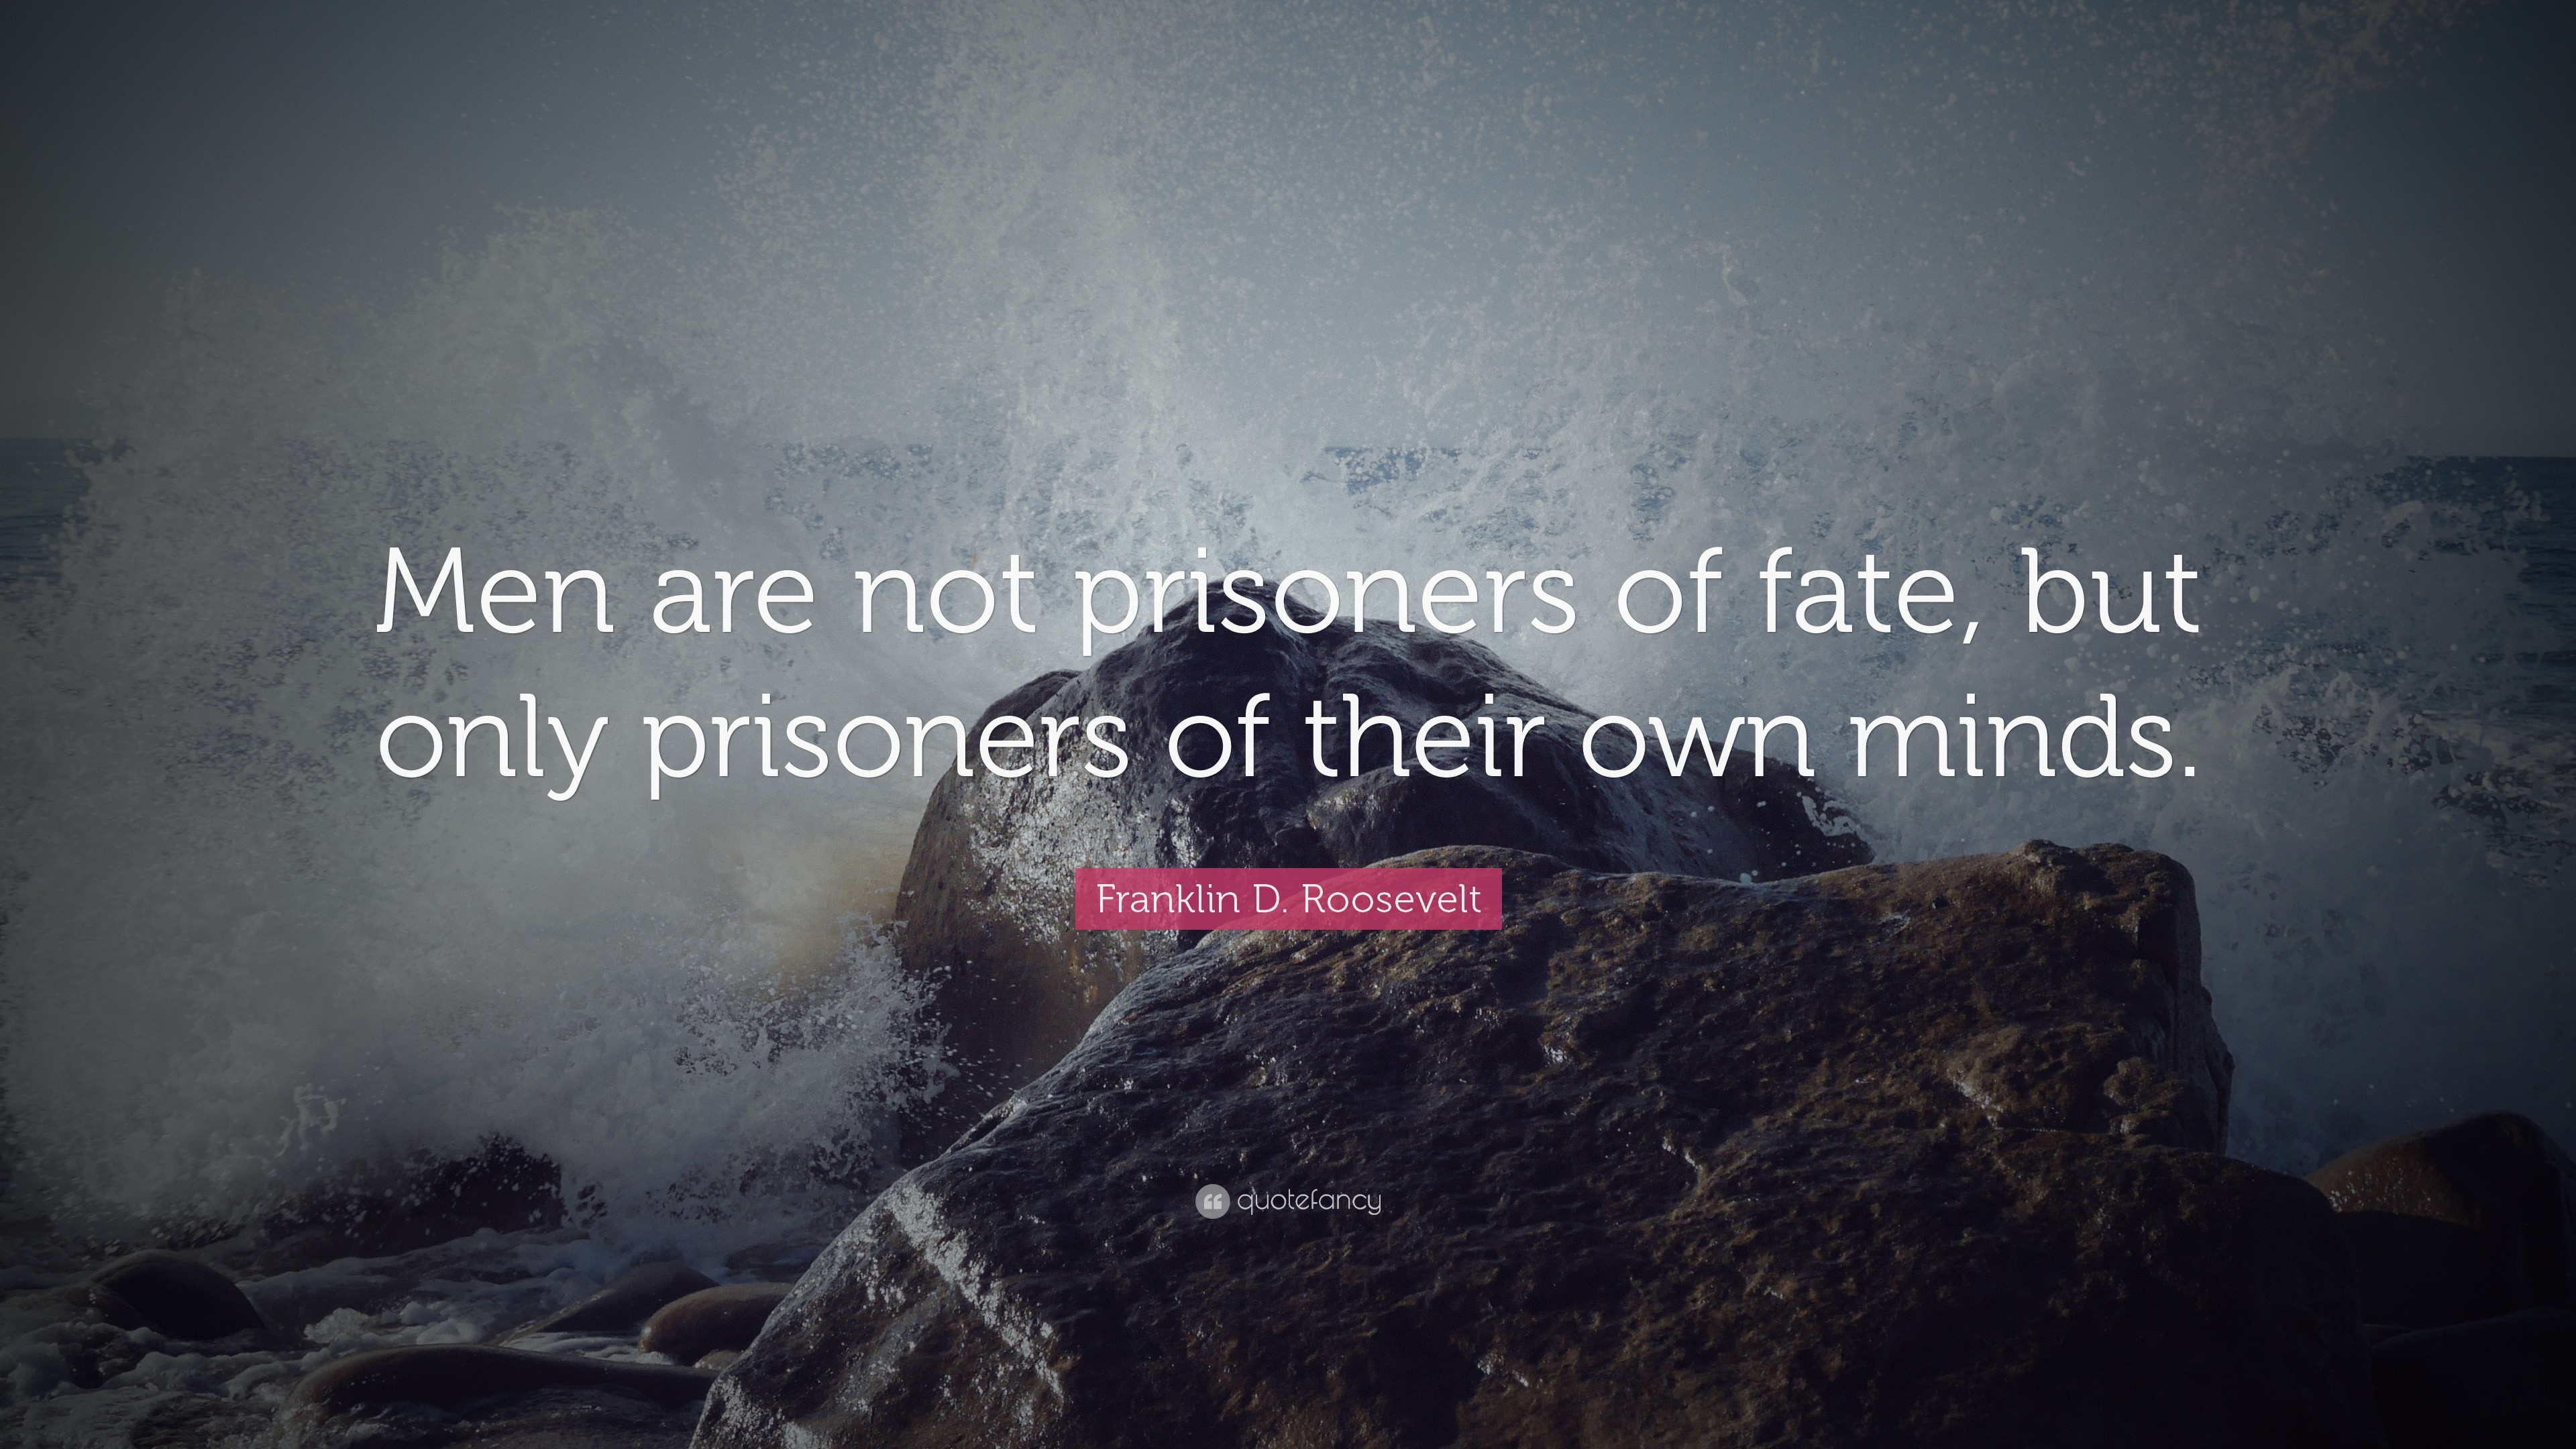 3840x2160 Franklin D. Roosevelt Quote: “Men are not prisoners of fate, but only